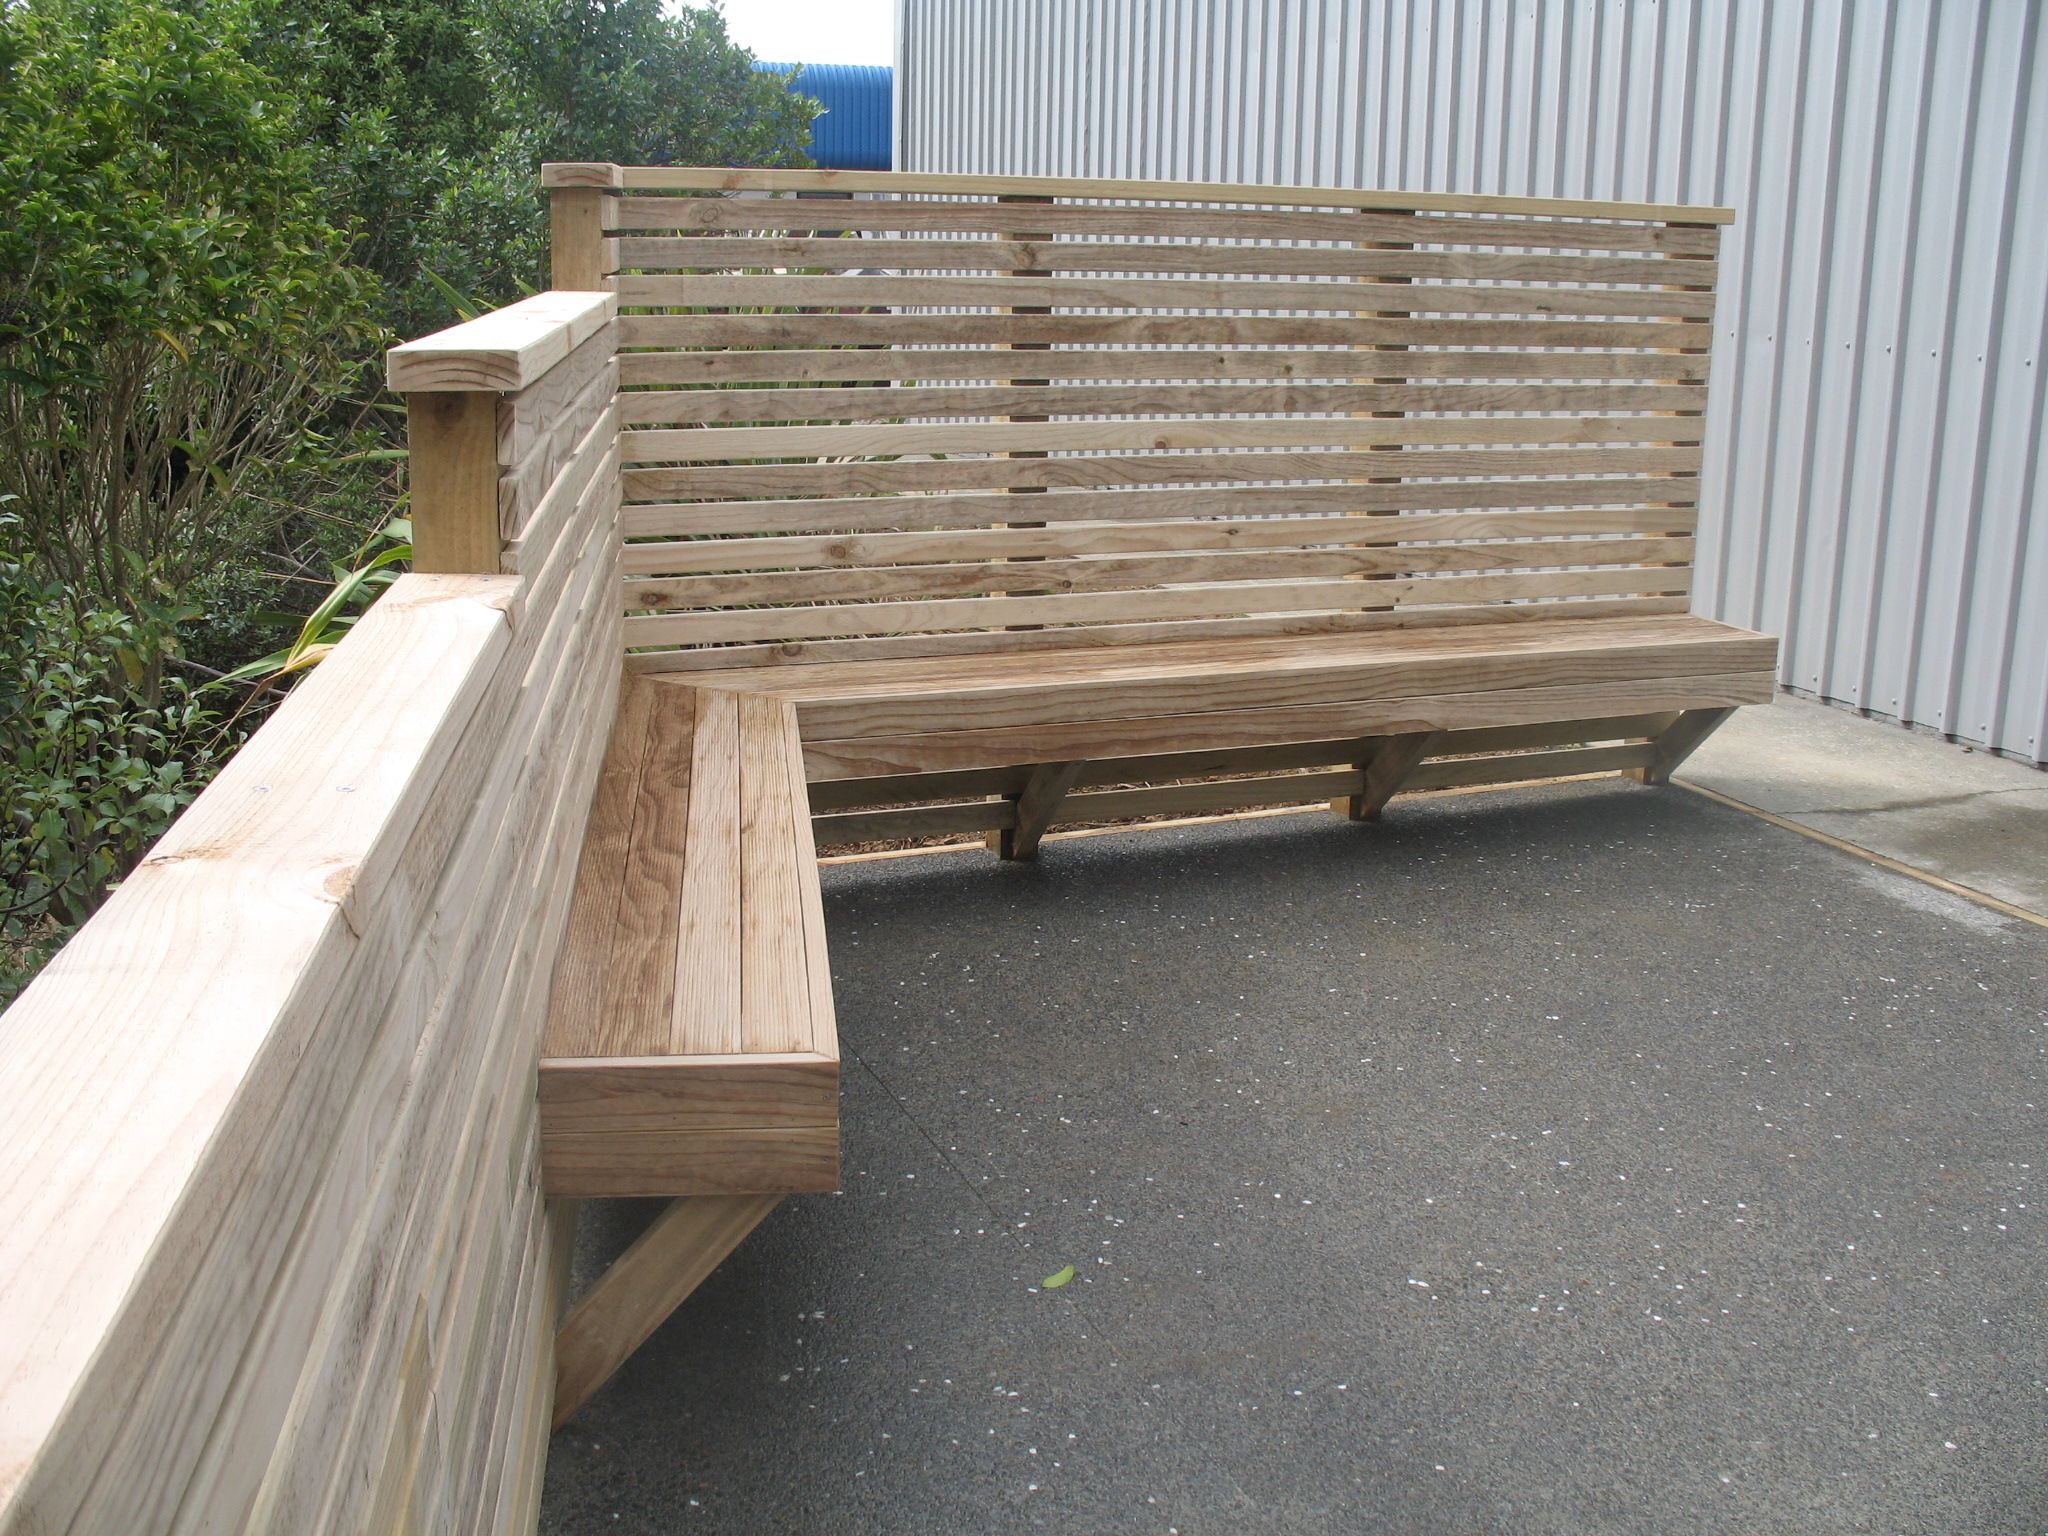 Fence and bench seat | Bench Fence | Pinterest | Bench seat, Fences ...